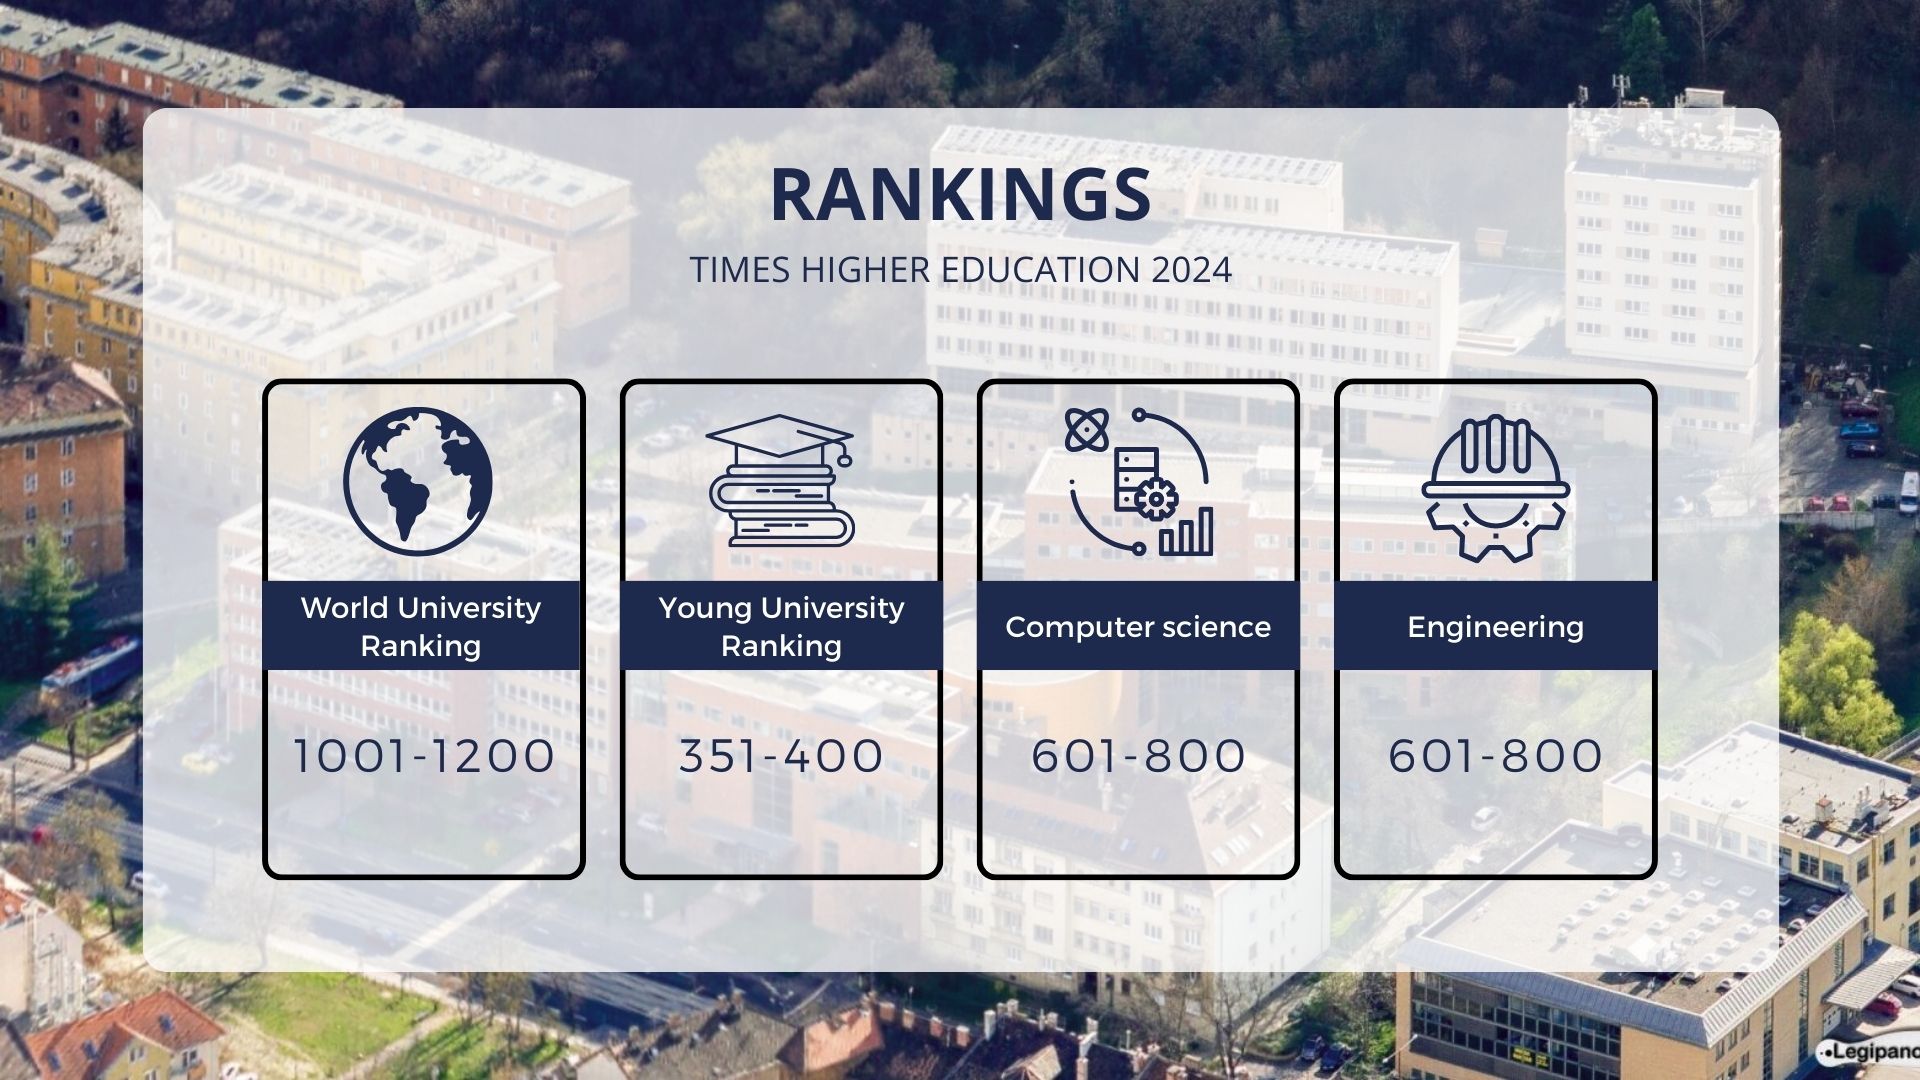 Obuda University’s place in the Times Higher Education University Ranking.